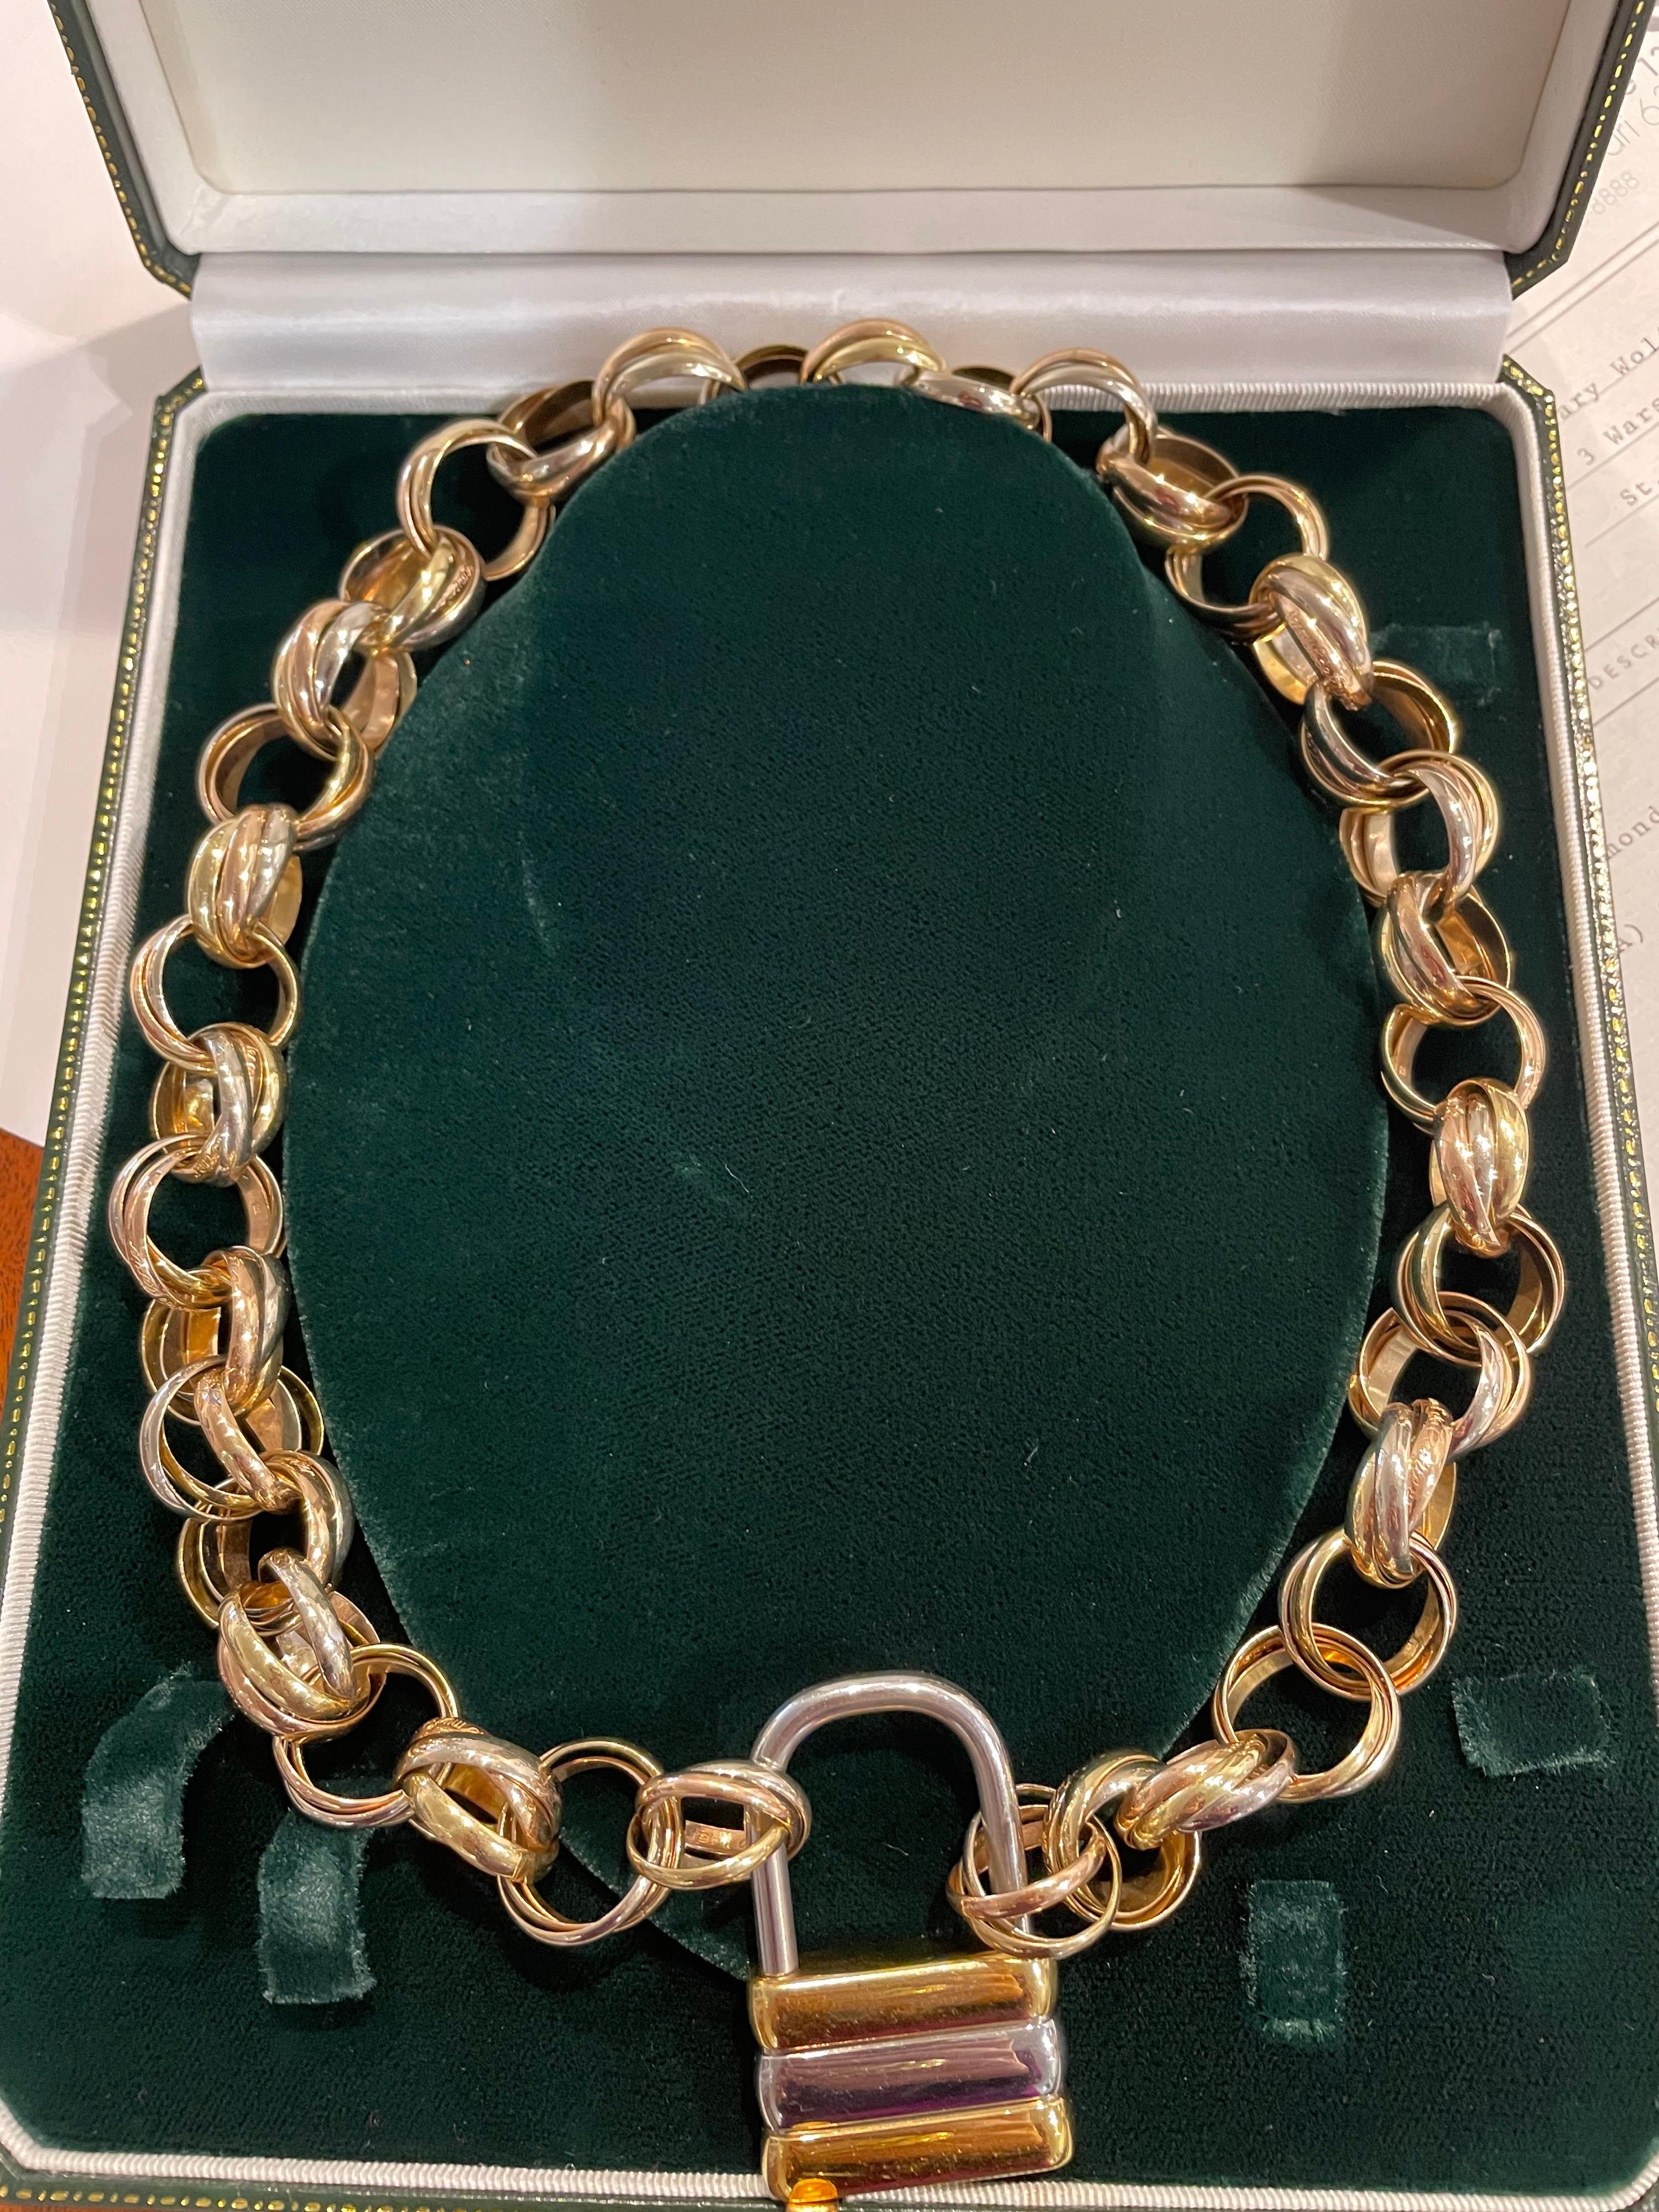 This one of a kind necklace is comprised of 38 Cartier 18kt tricolor rings and closed with a Cartier padlock. It’s absolutely exceptional and so wearable. This is a standout piece!